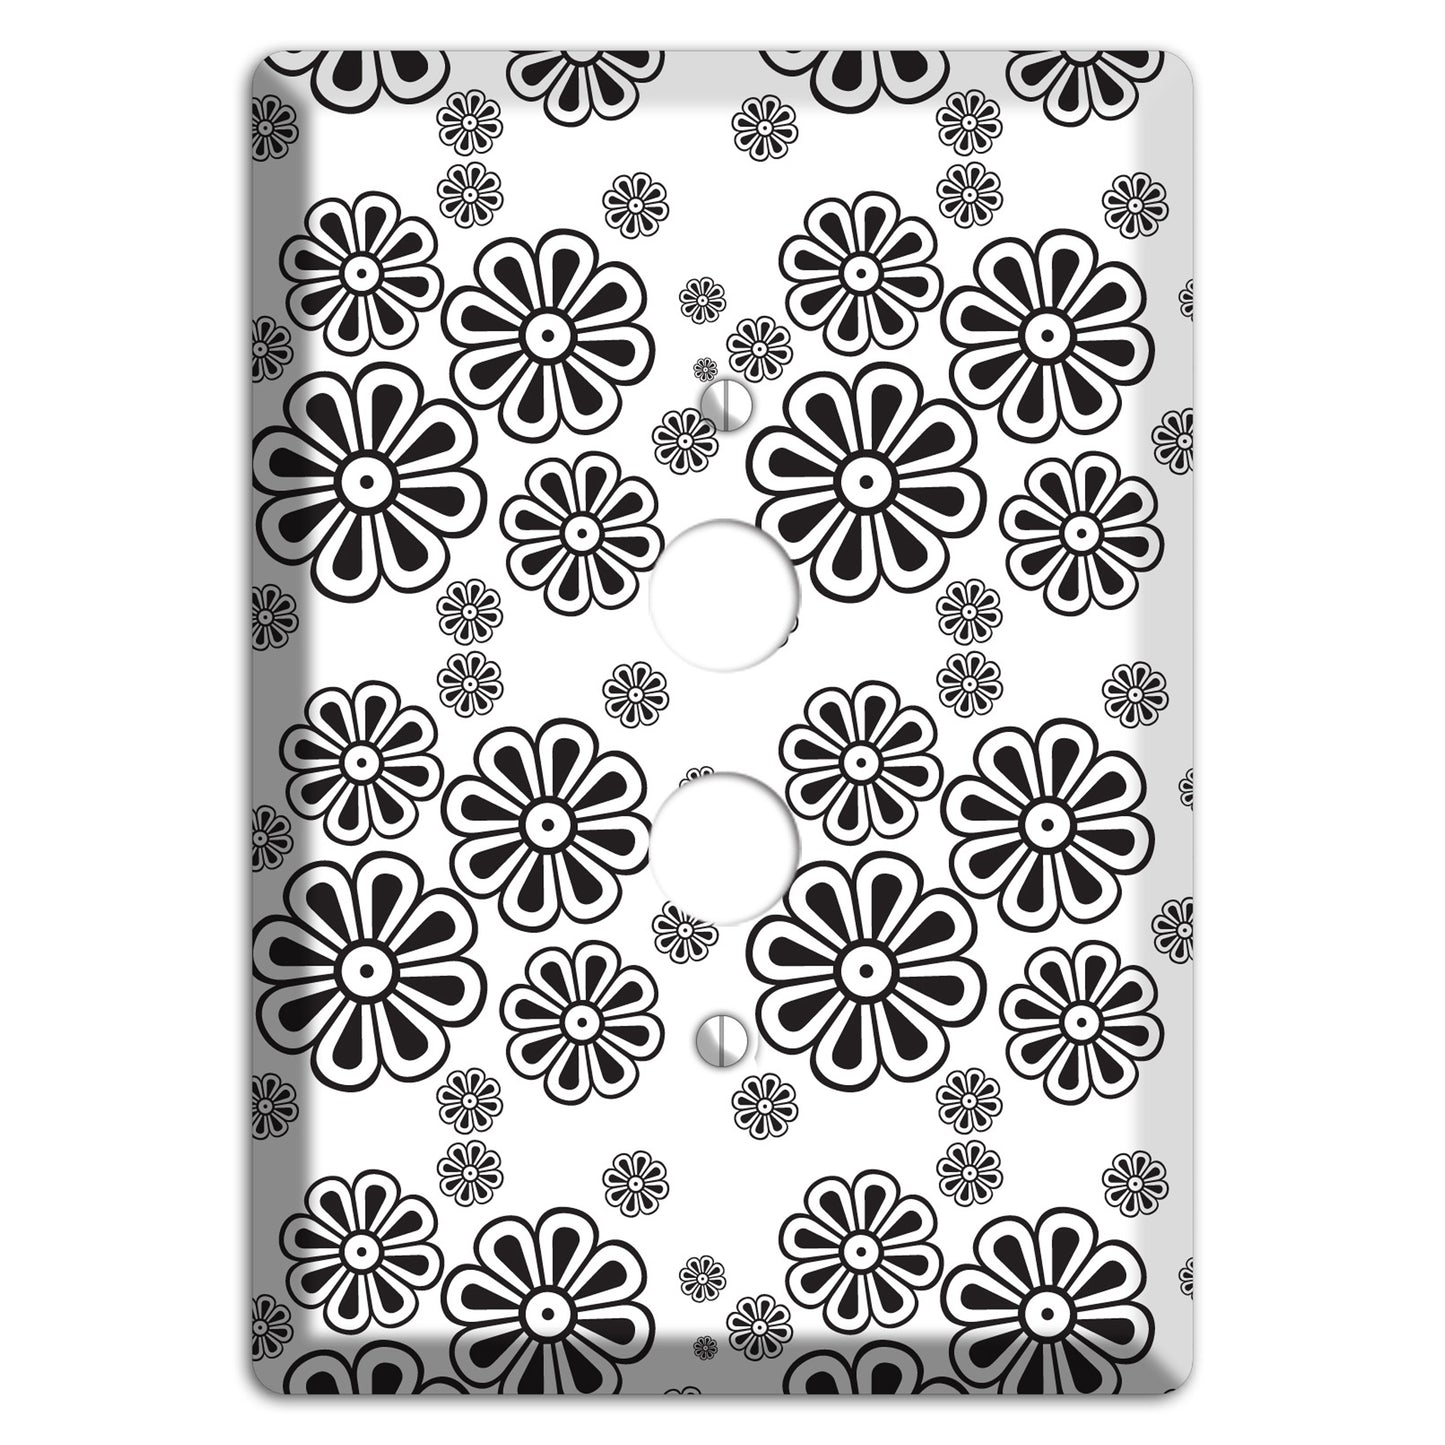 White With Black Small Retro Floral Contour 1 Pushbutton Wallplate